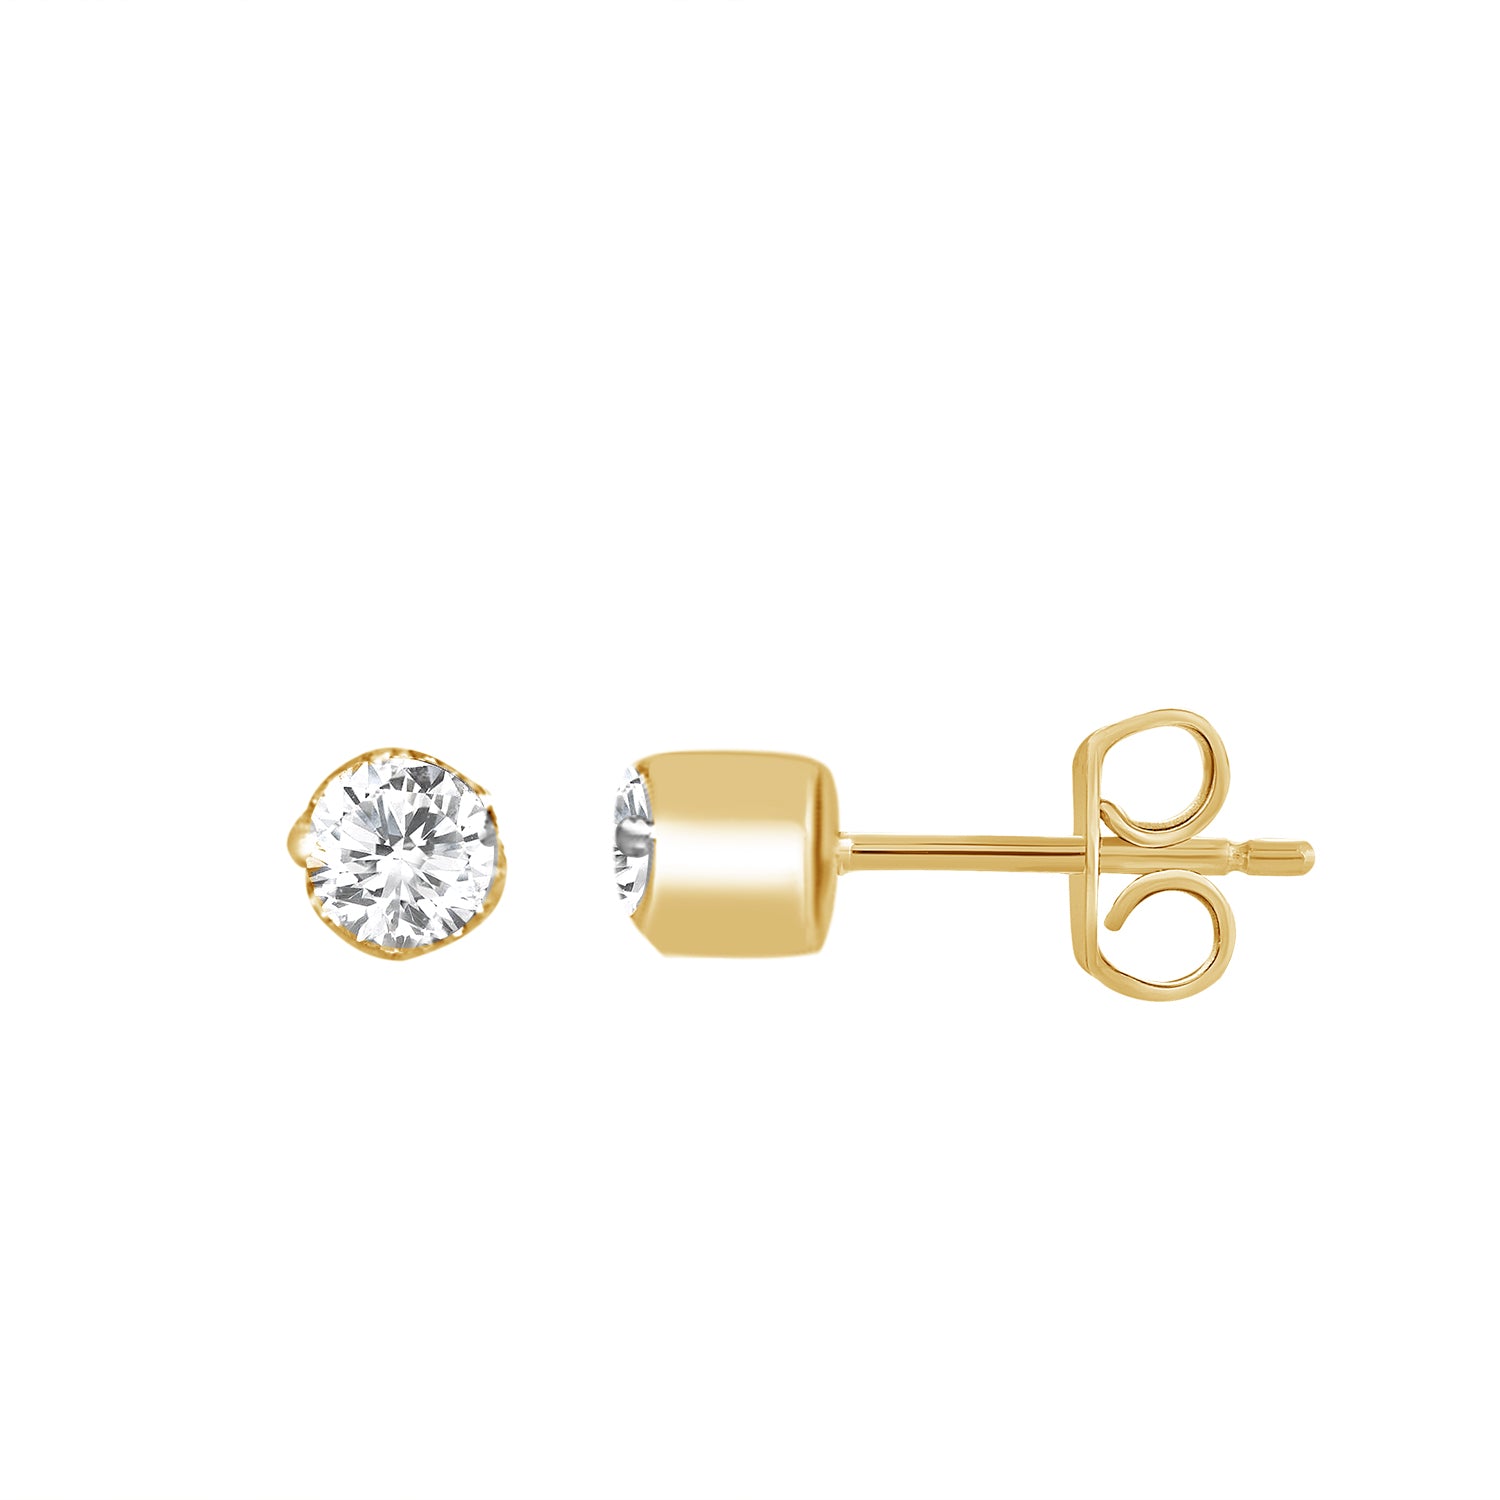 Round Studs / Earrings With 0.10 Carat TW Of Diamonds In 10K Yellow Gold